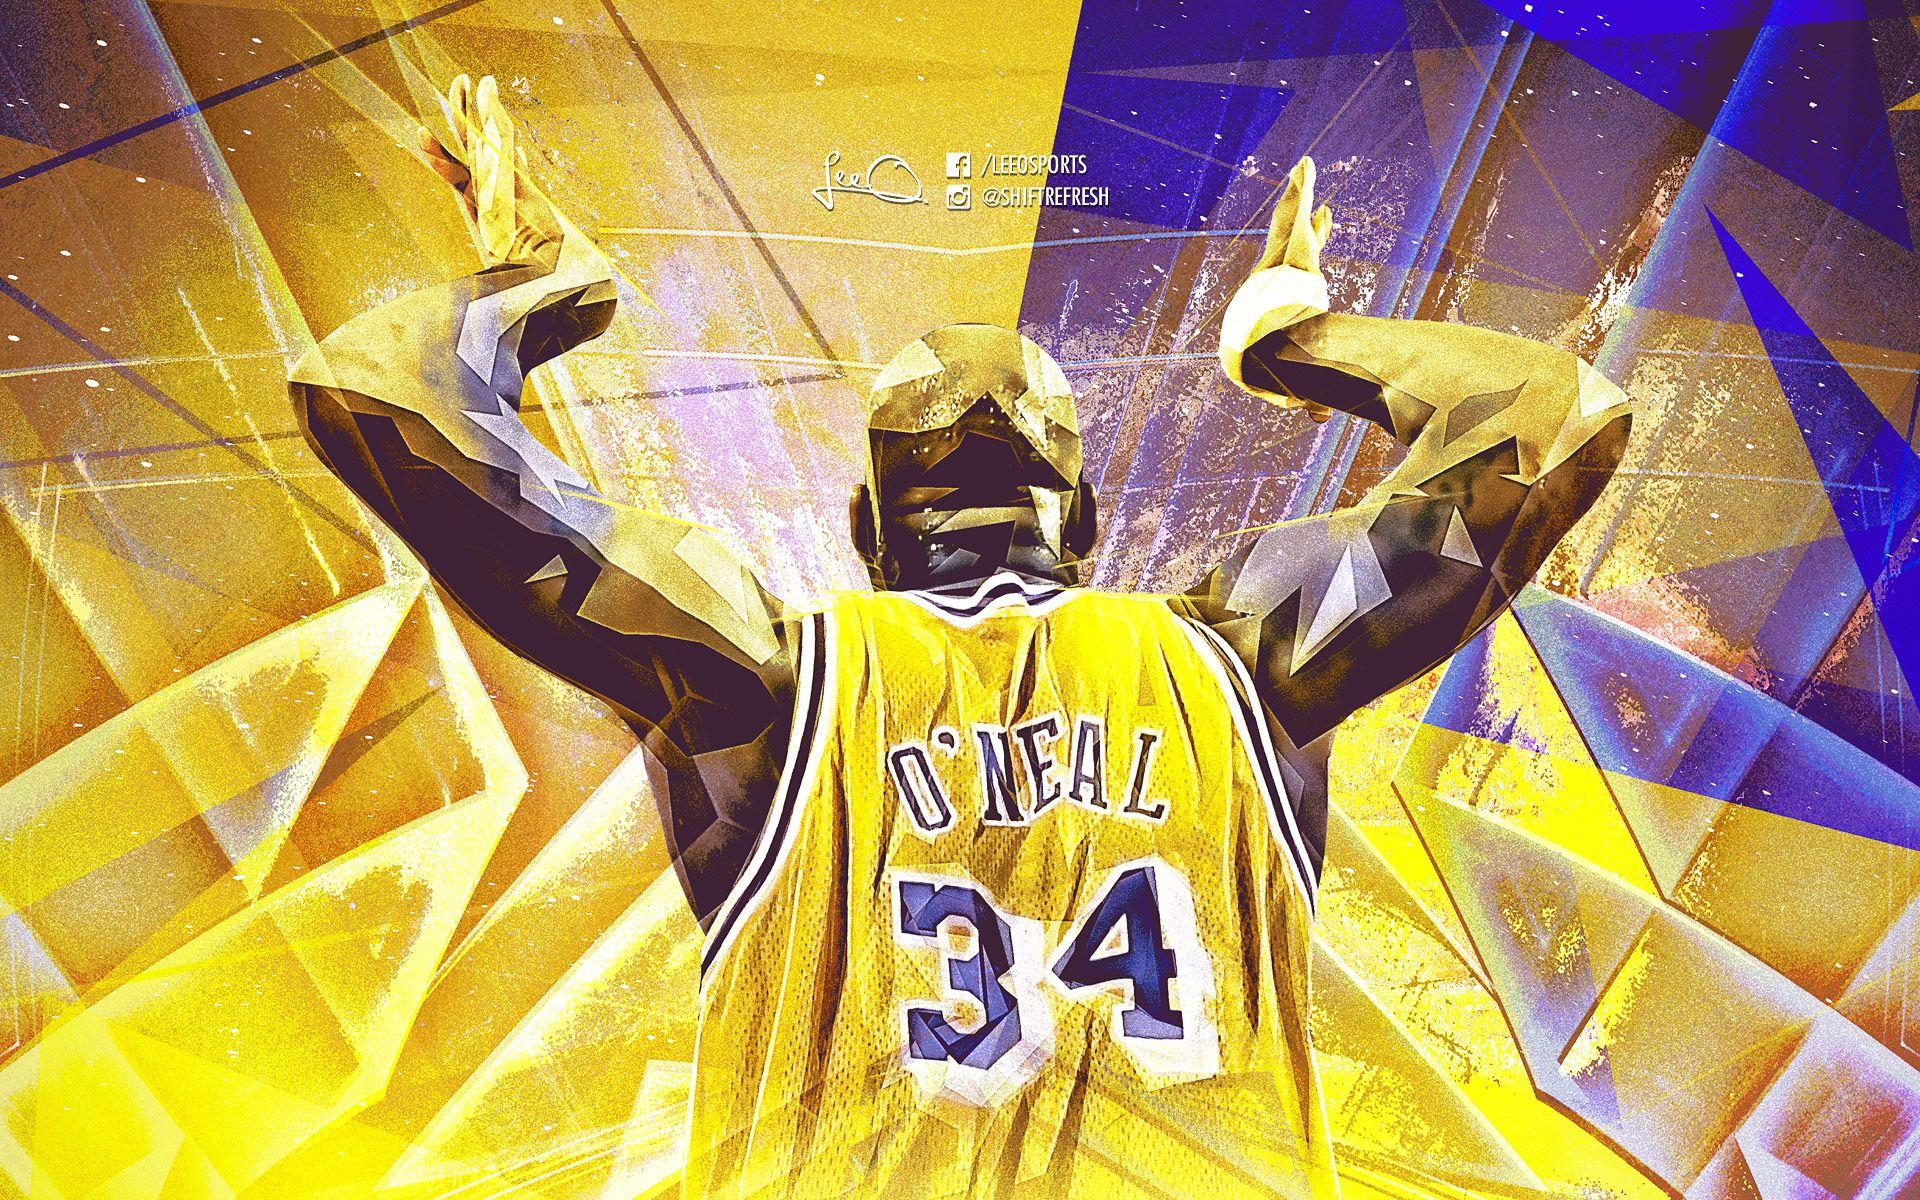 Shaquille ONeal Wallpapers  Wallpaper Cave